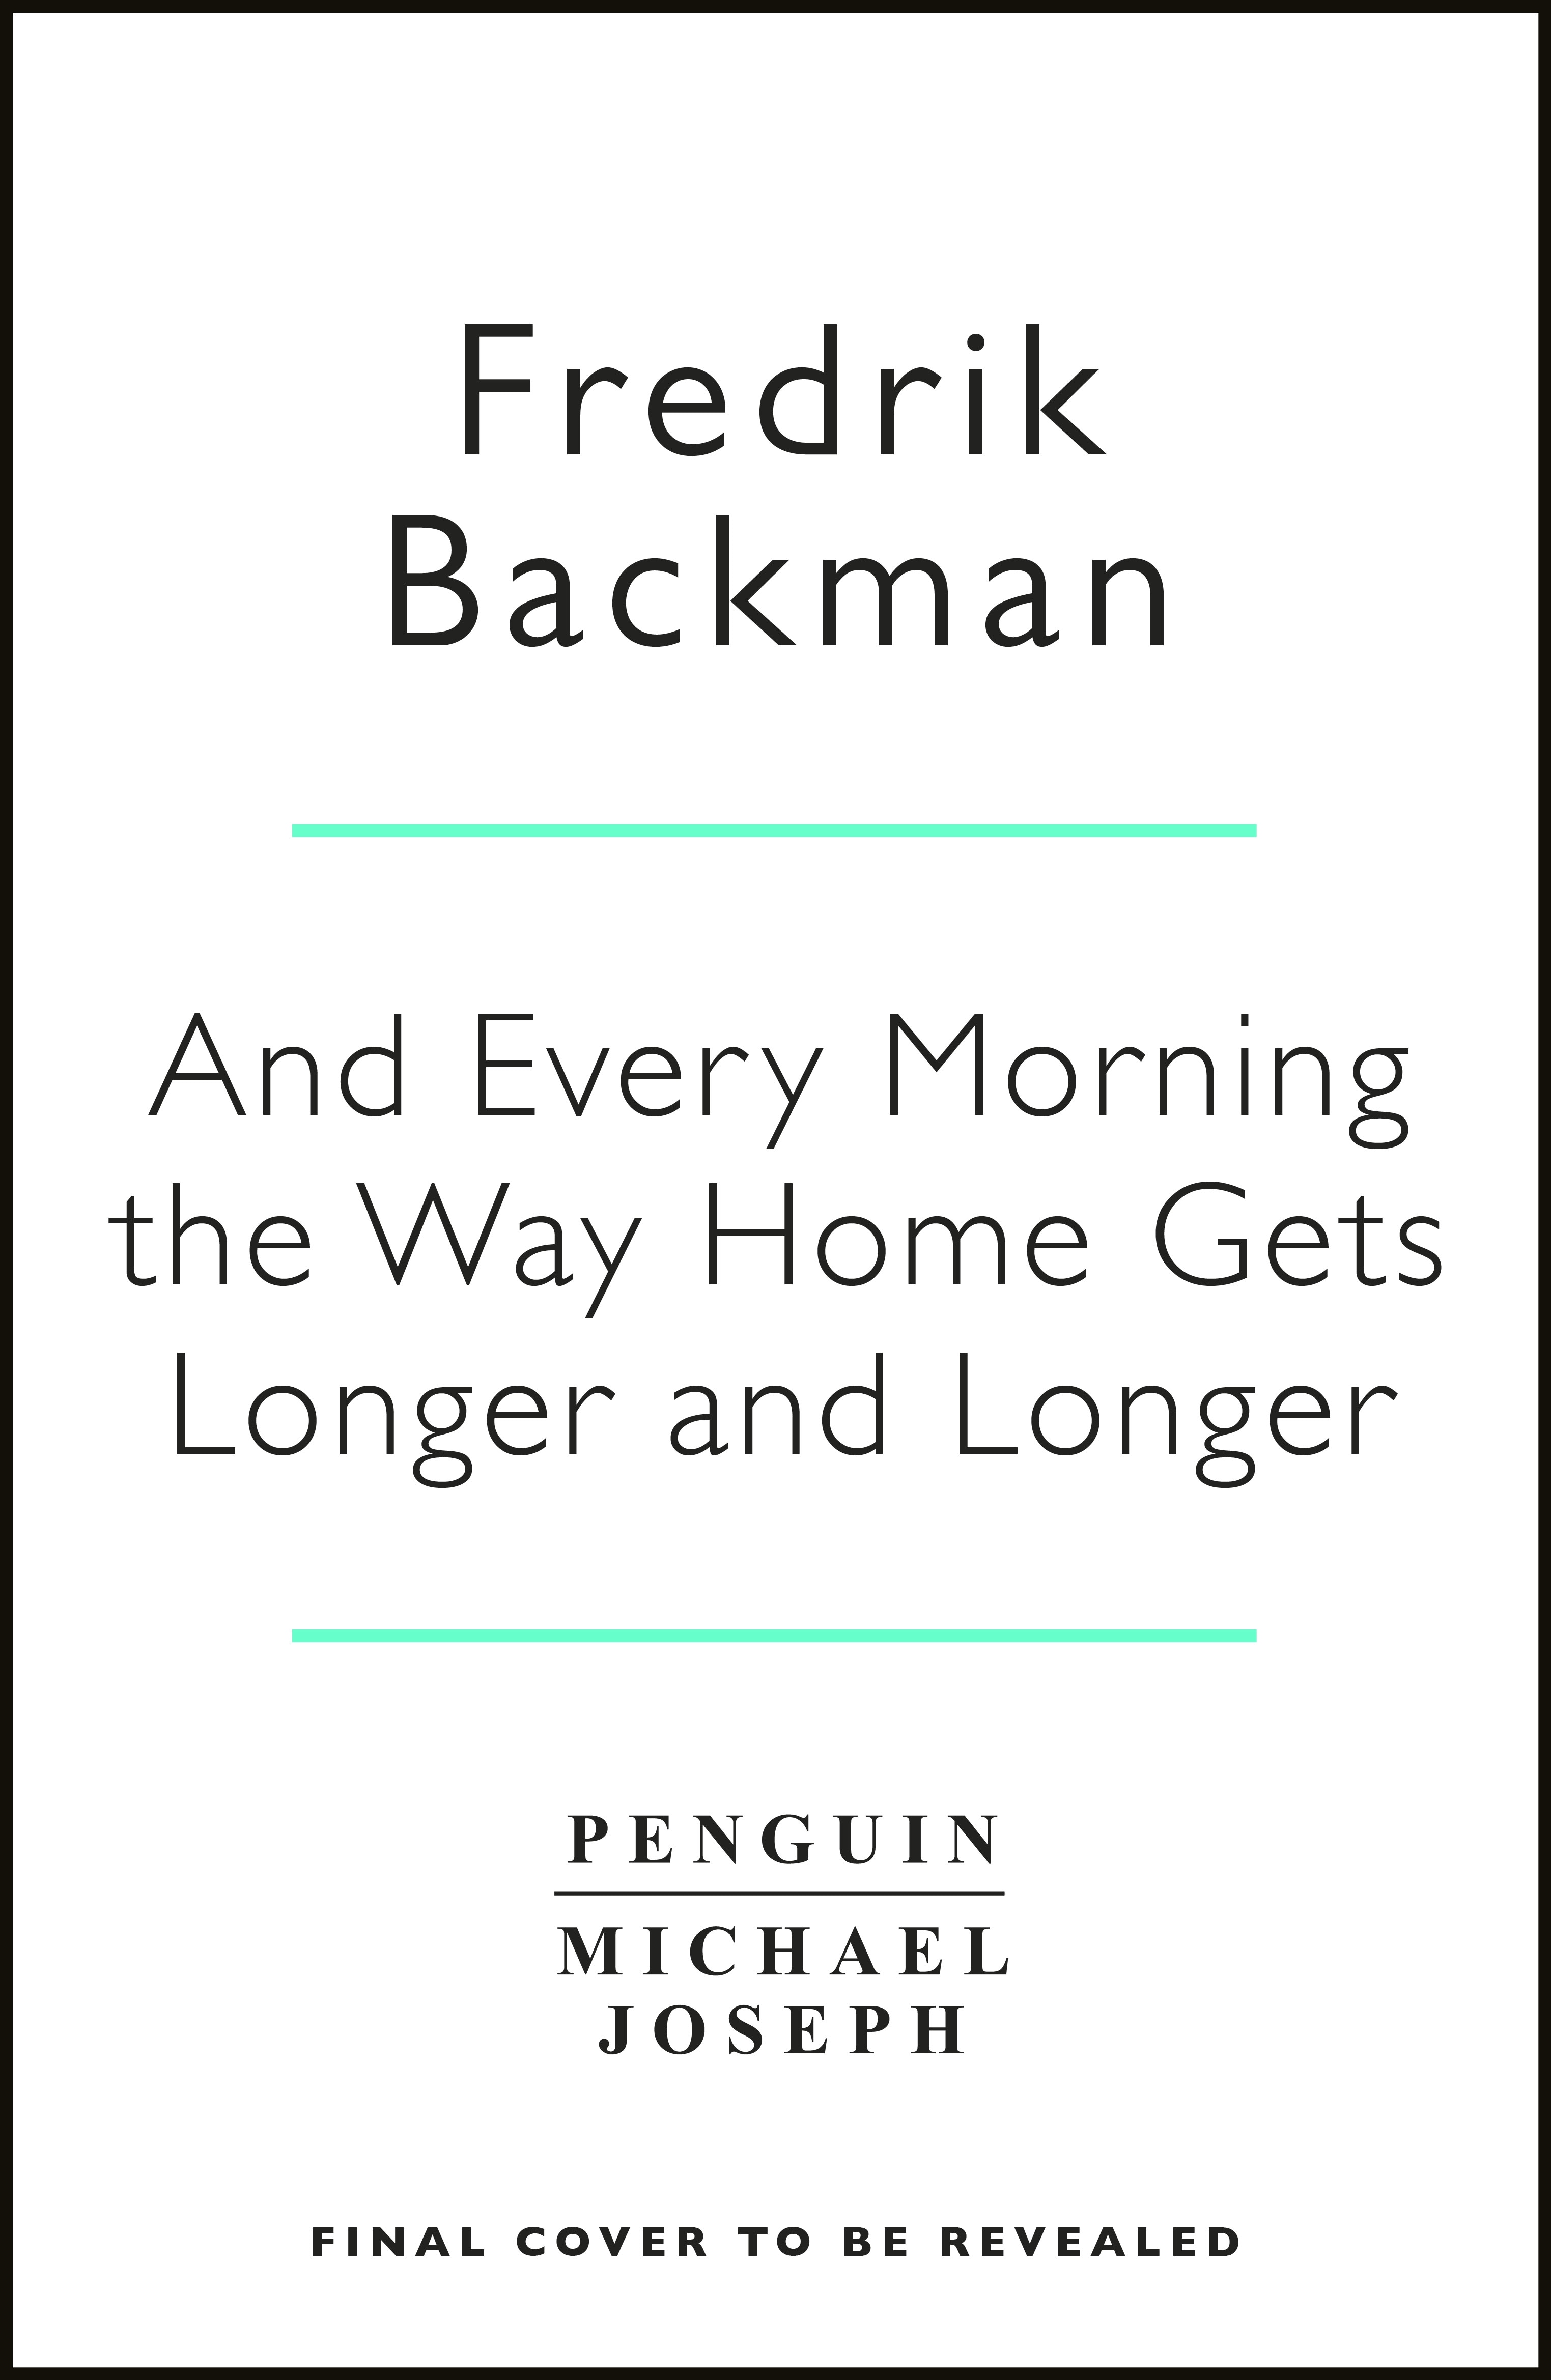 Book “And Every Morning the Way Home Gets Longer and Longer” by Fredrik Backman — October 27, 2022